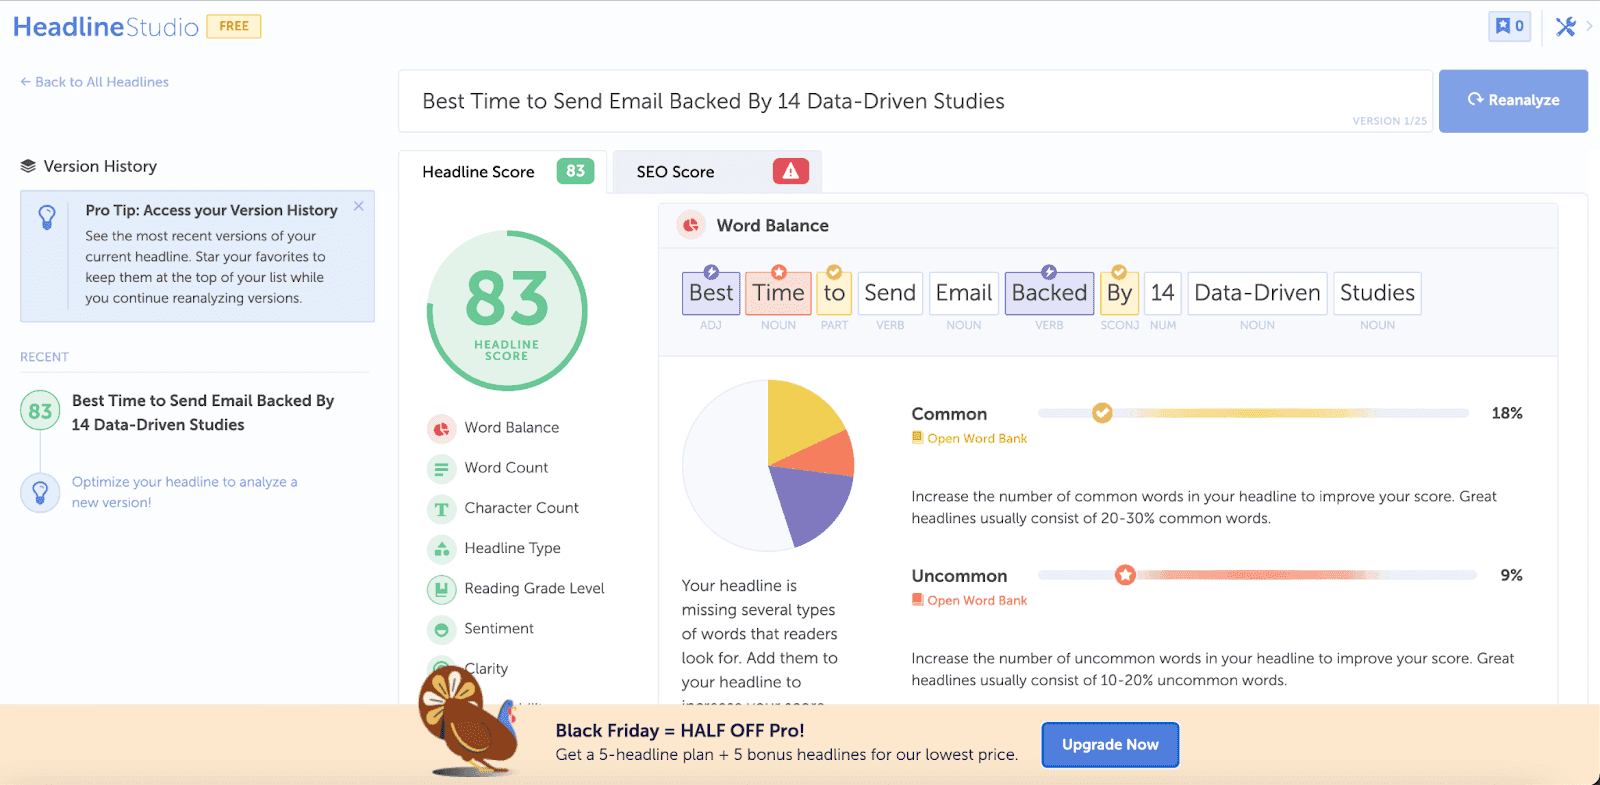 Headline studio ratings for CoSchedule's email time article